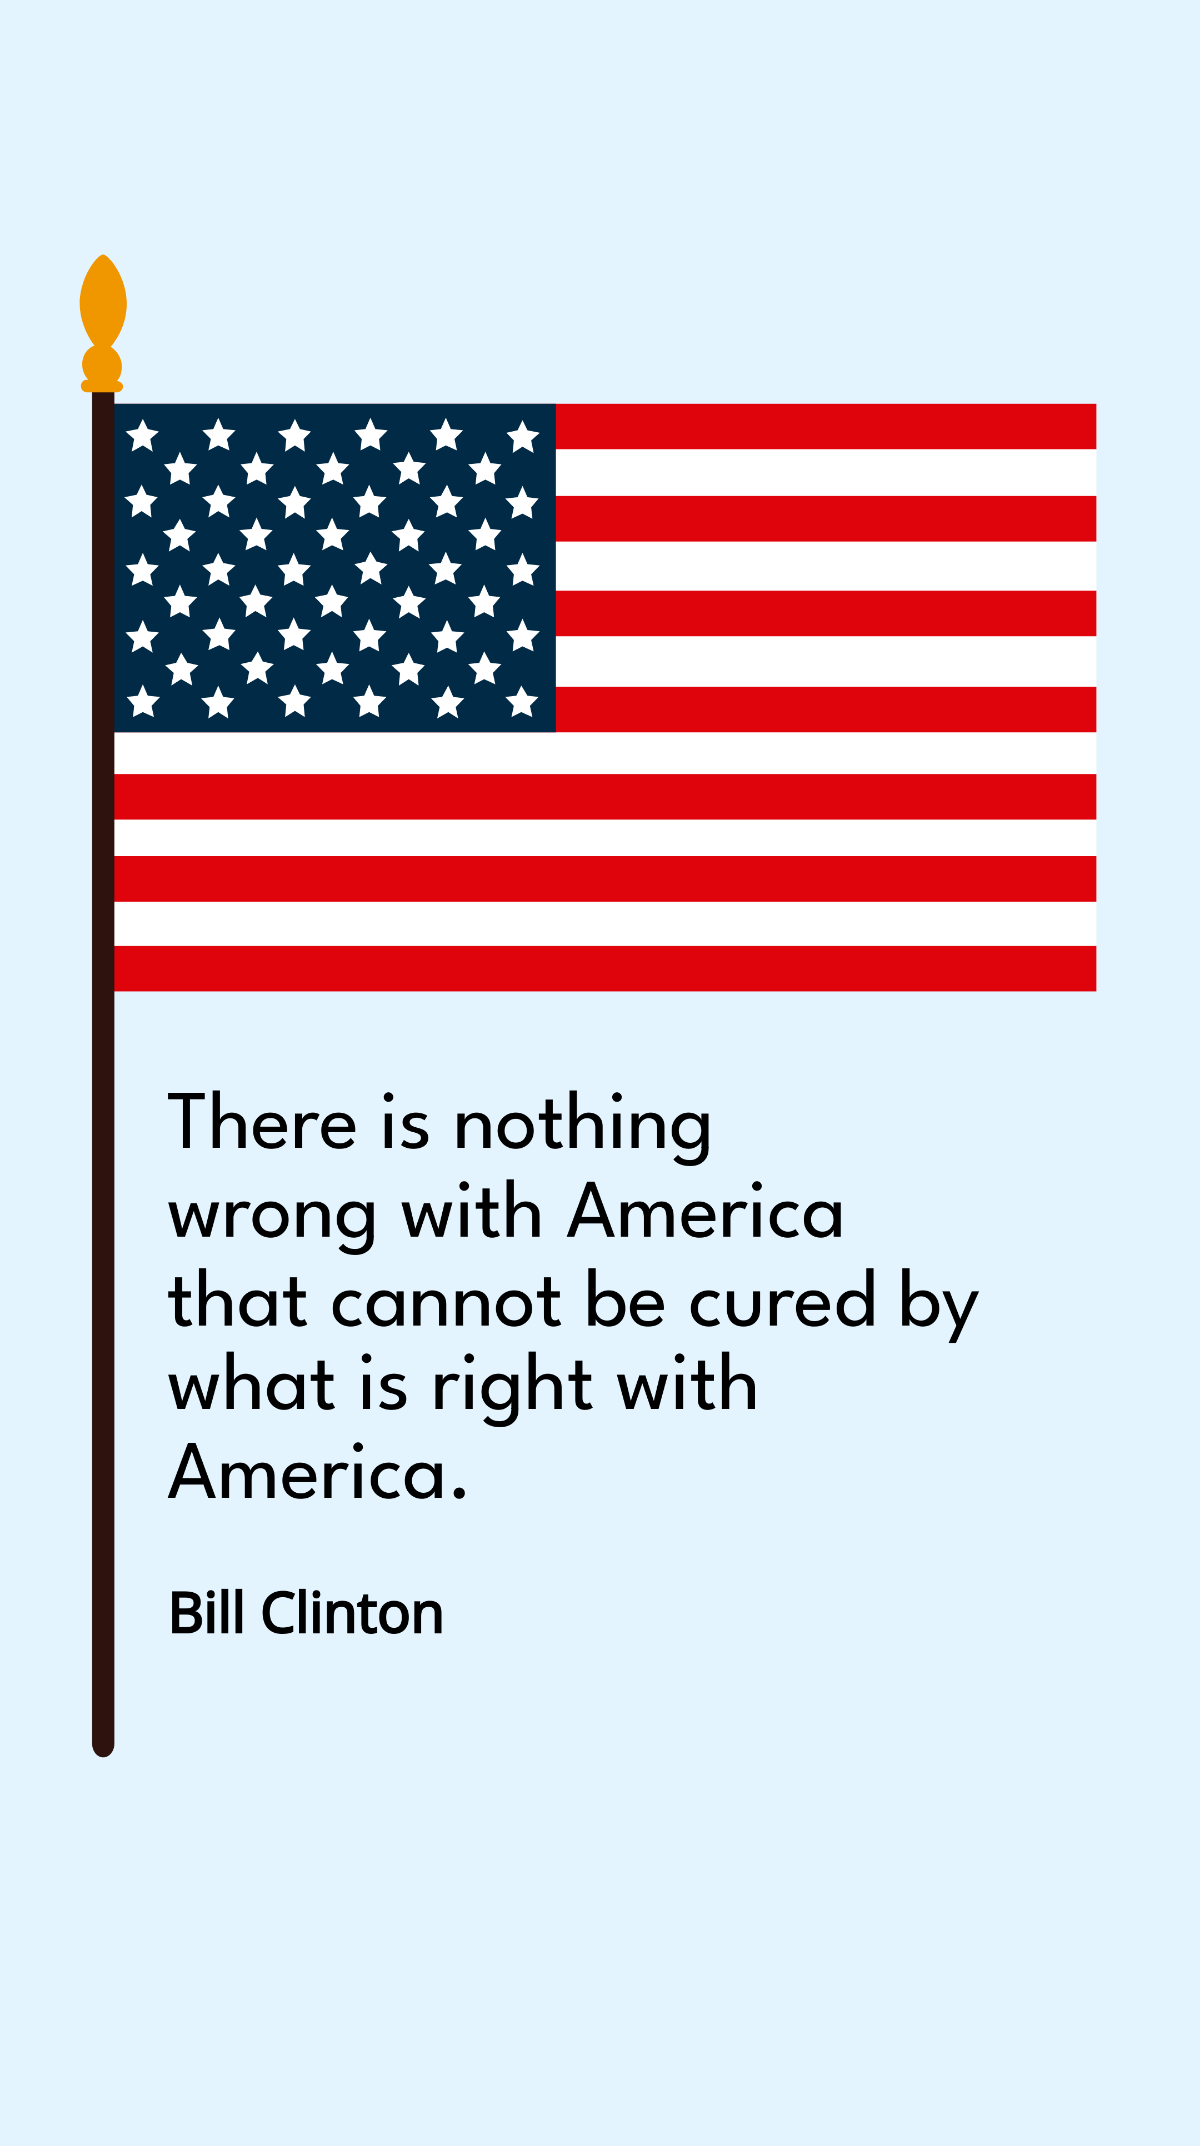 Bill Clinton - There is nothing wrong with America that cannot be cured by what is right with America. Template